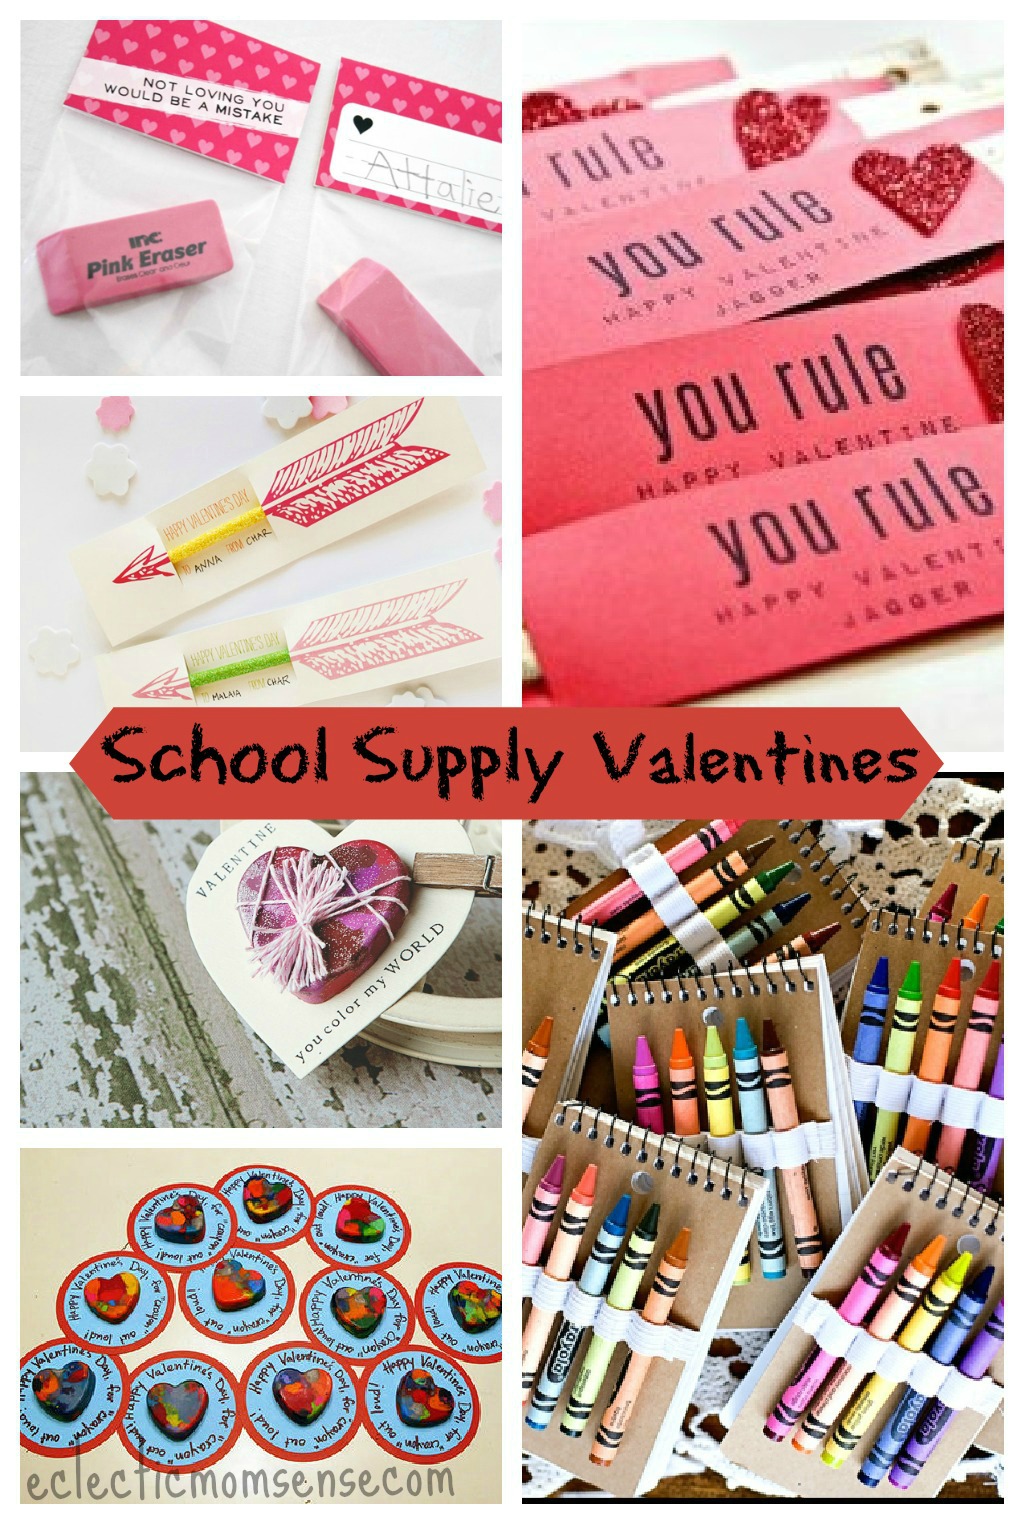 School Supply Valentines Ideas via @eclecticmommy - eclecticmomsense.com